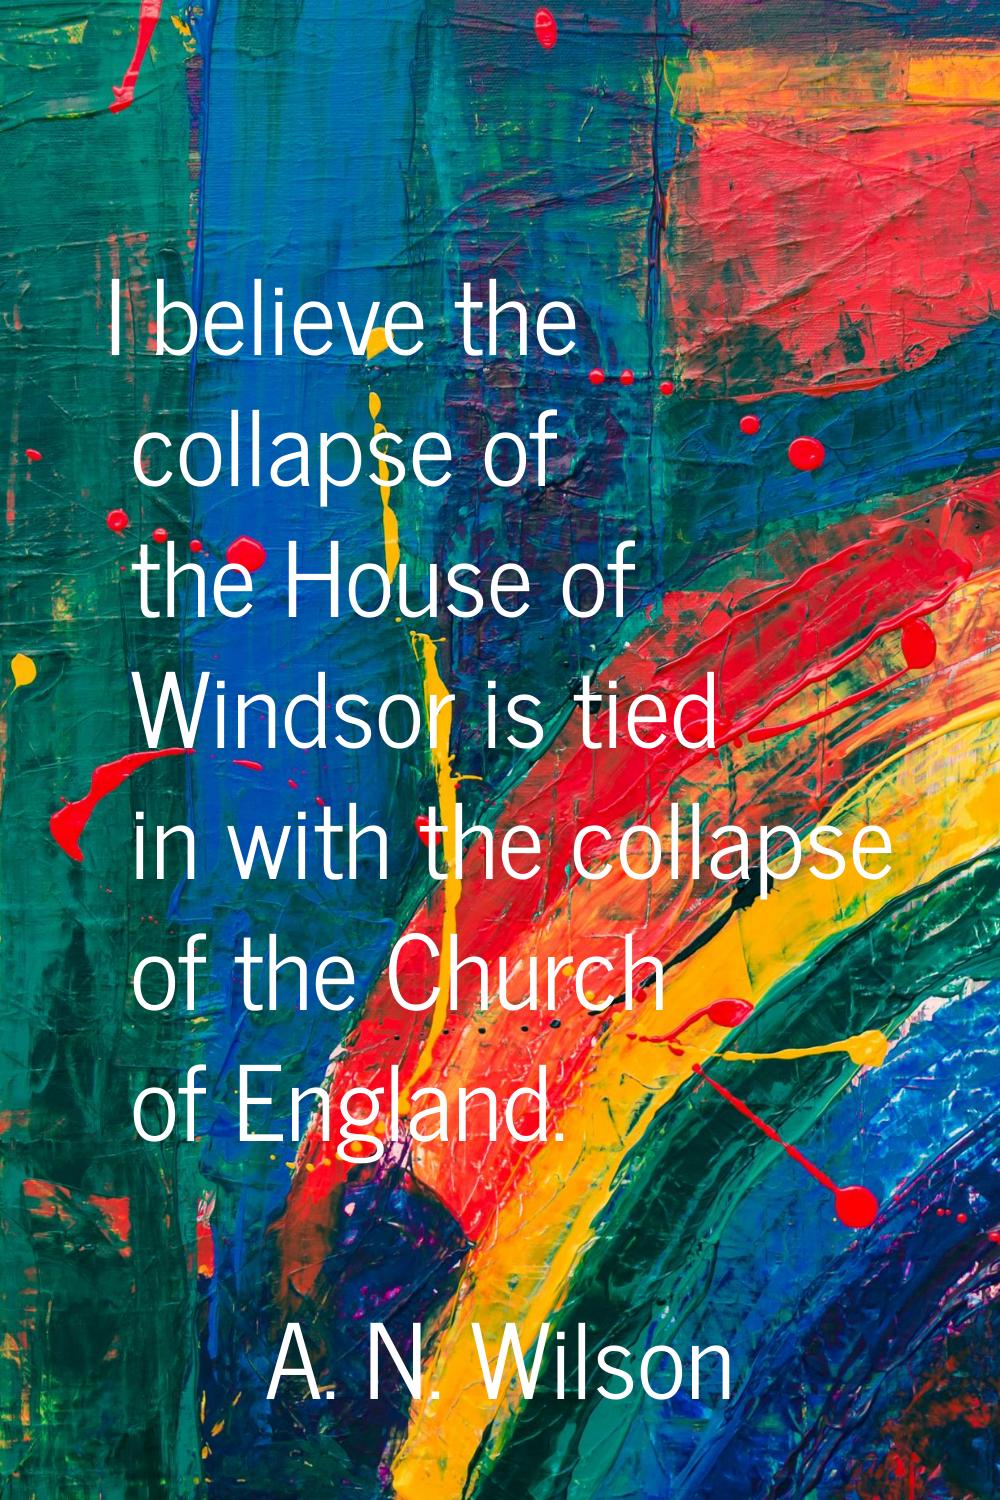 I believe the collapse of the House of Windsor is tied in with the collapse of the Church of Englan